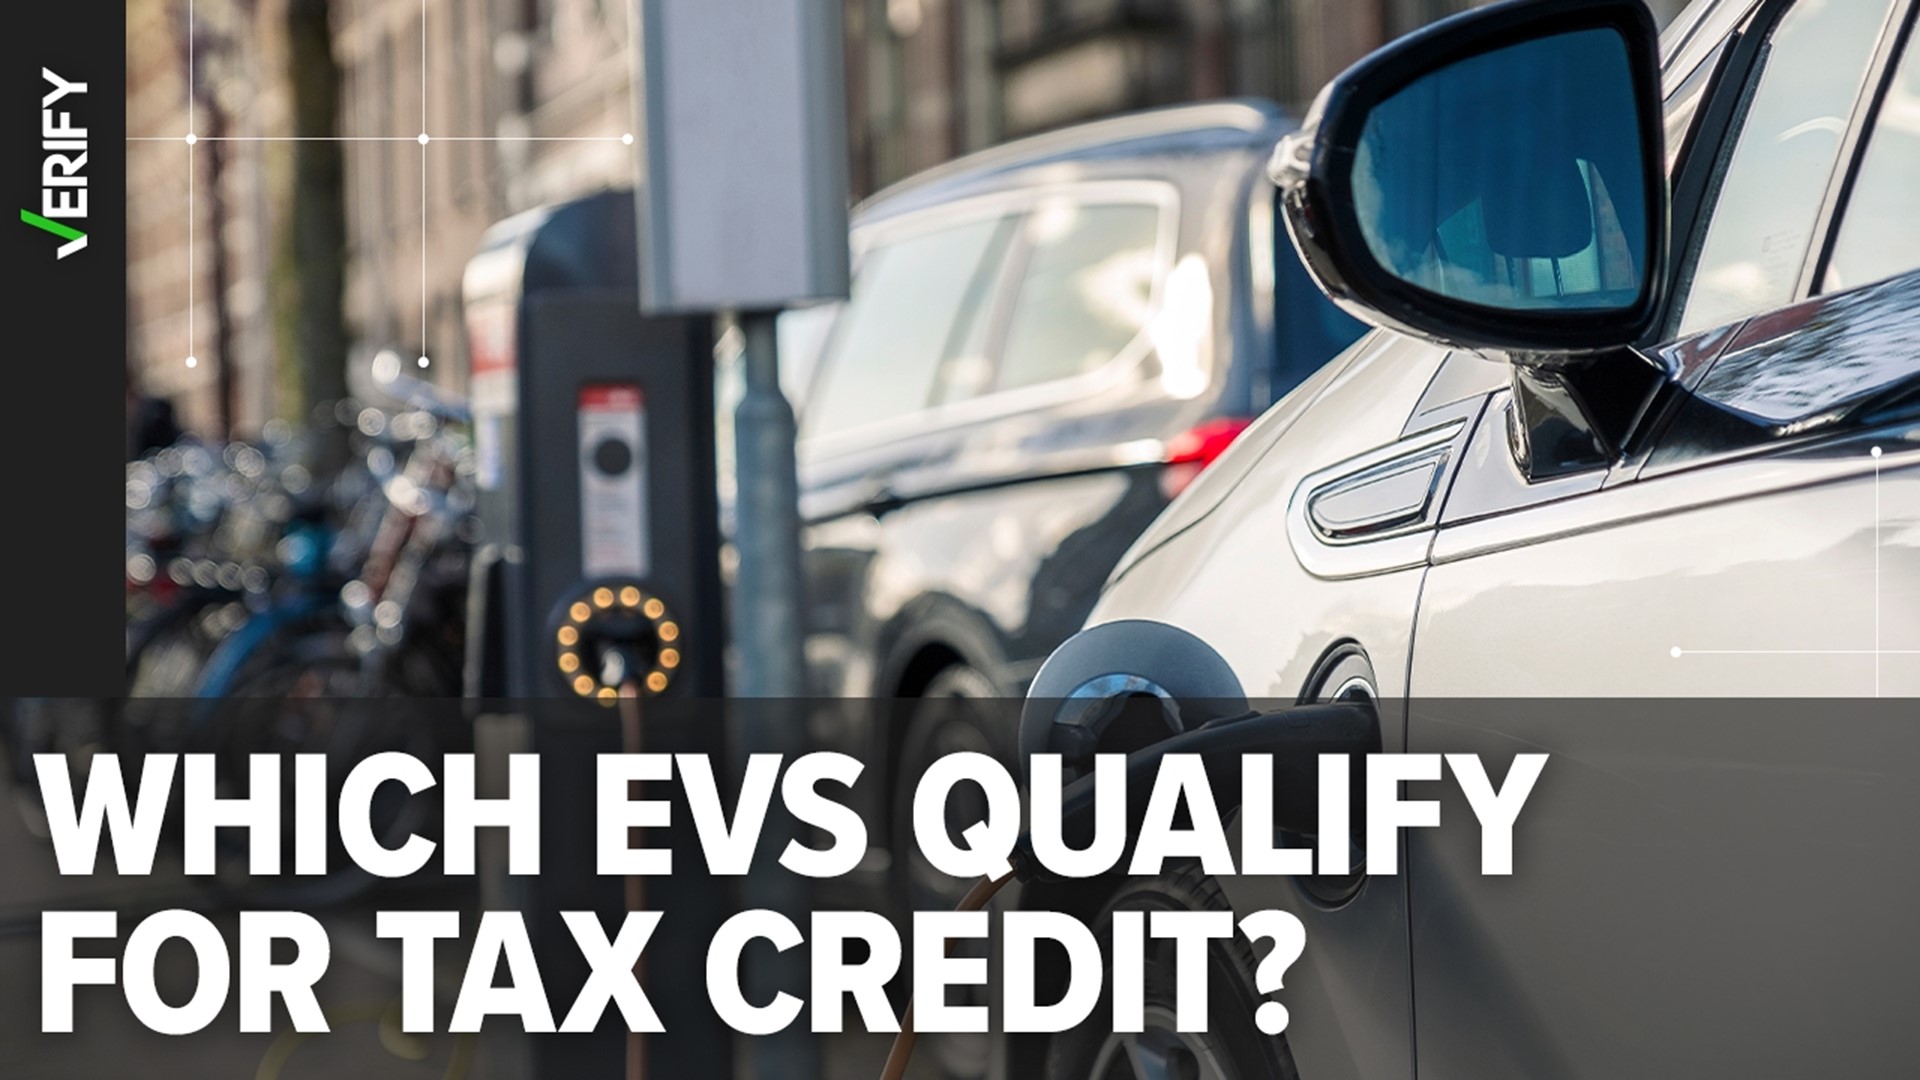 The Inflation Reduction Act includes tax credits for electric vehicles, but there are restrictions based on the price of the car and where it’s made.